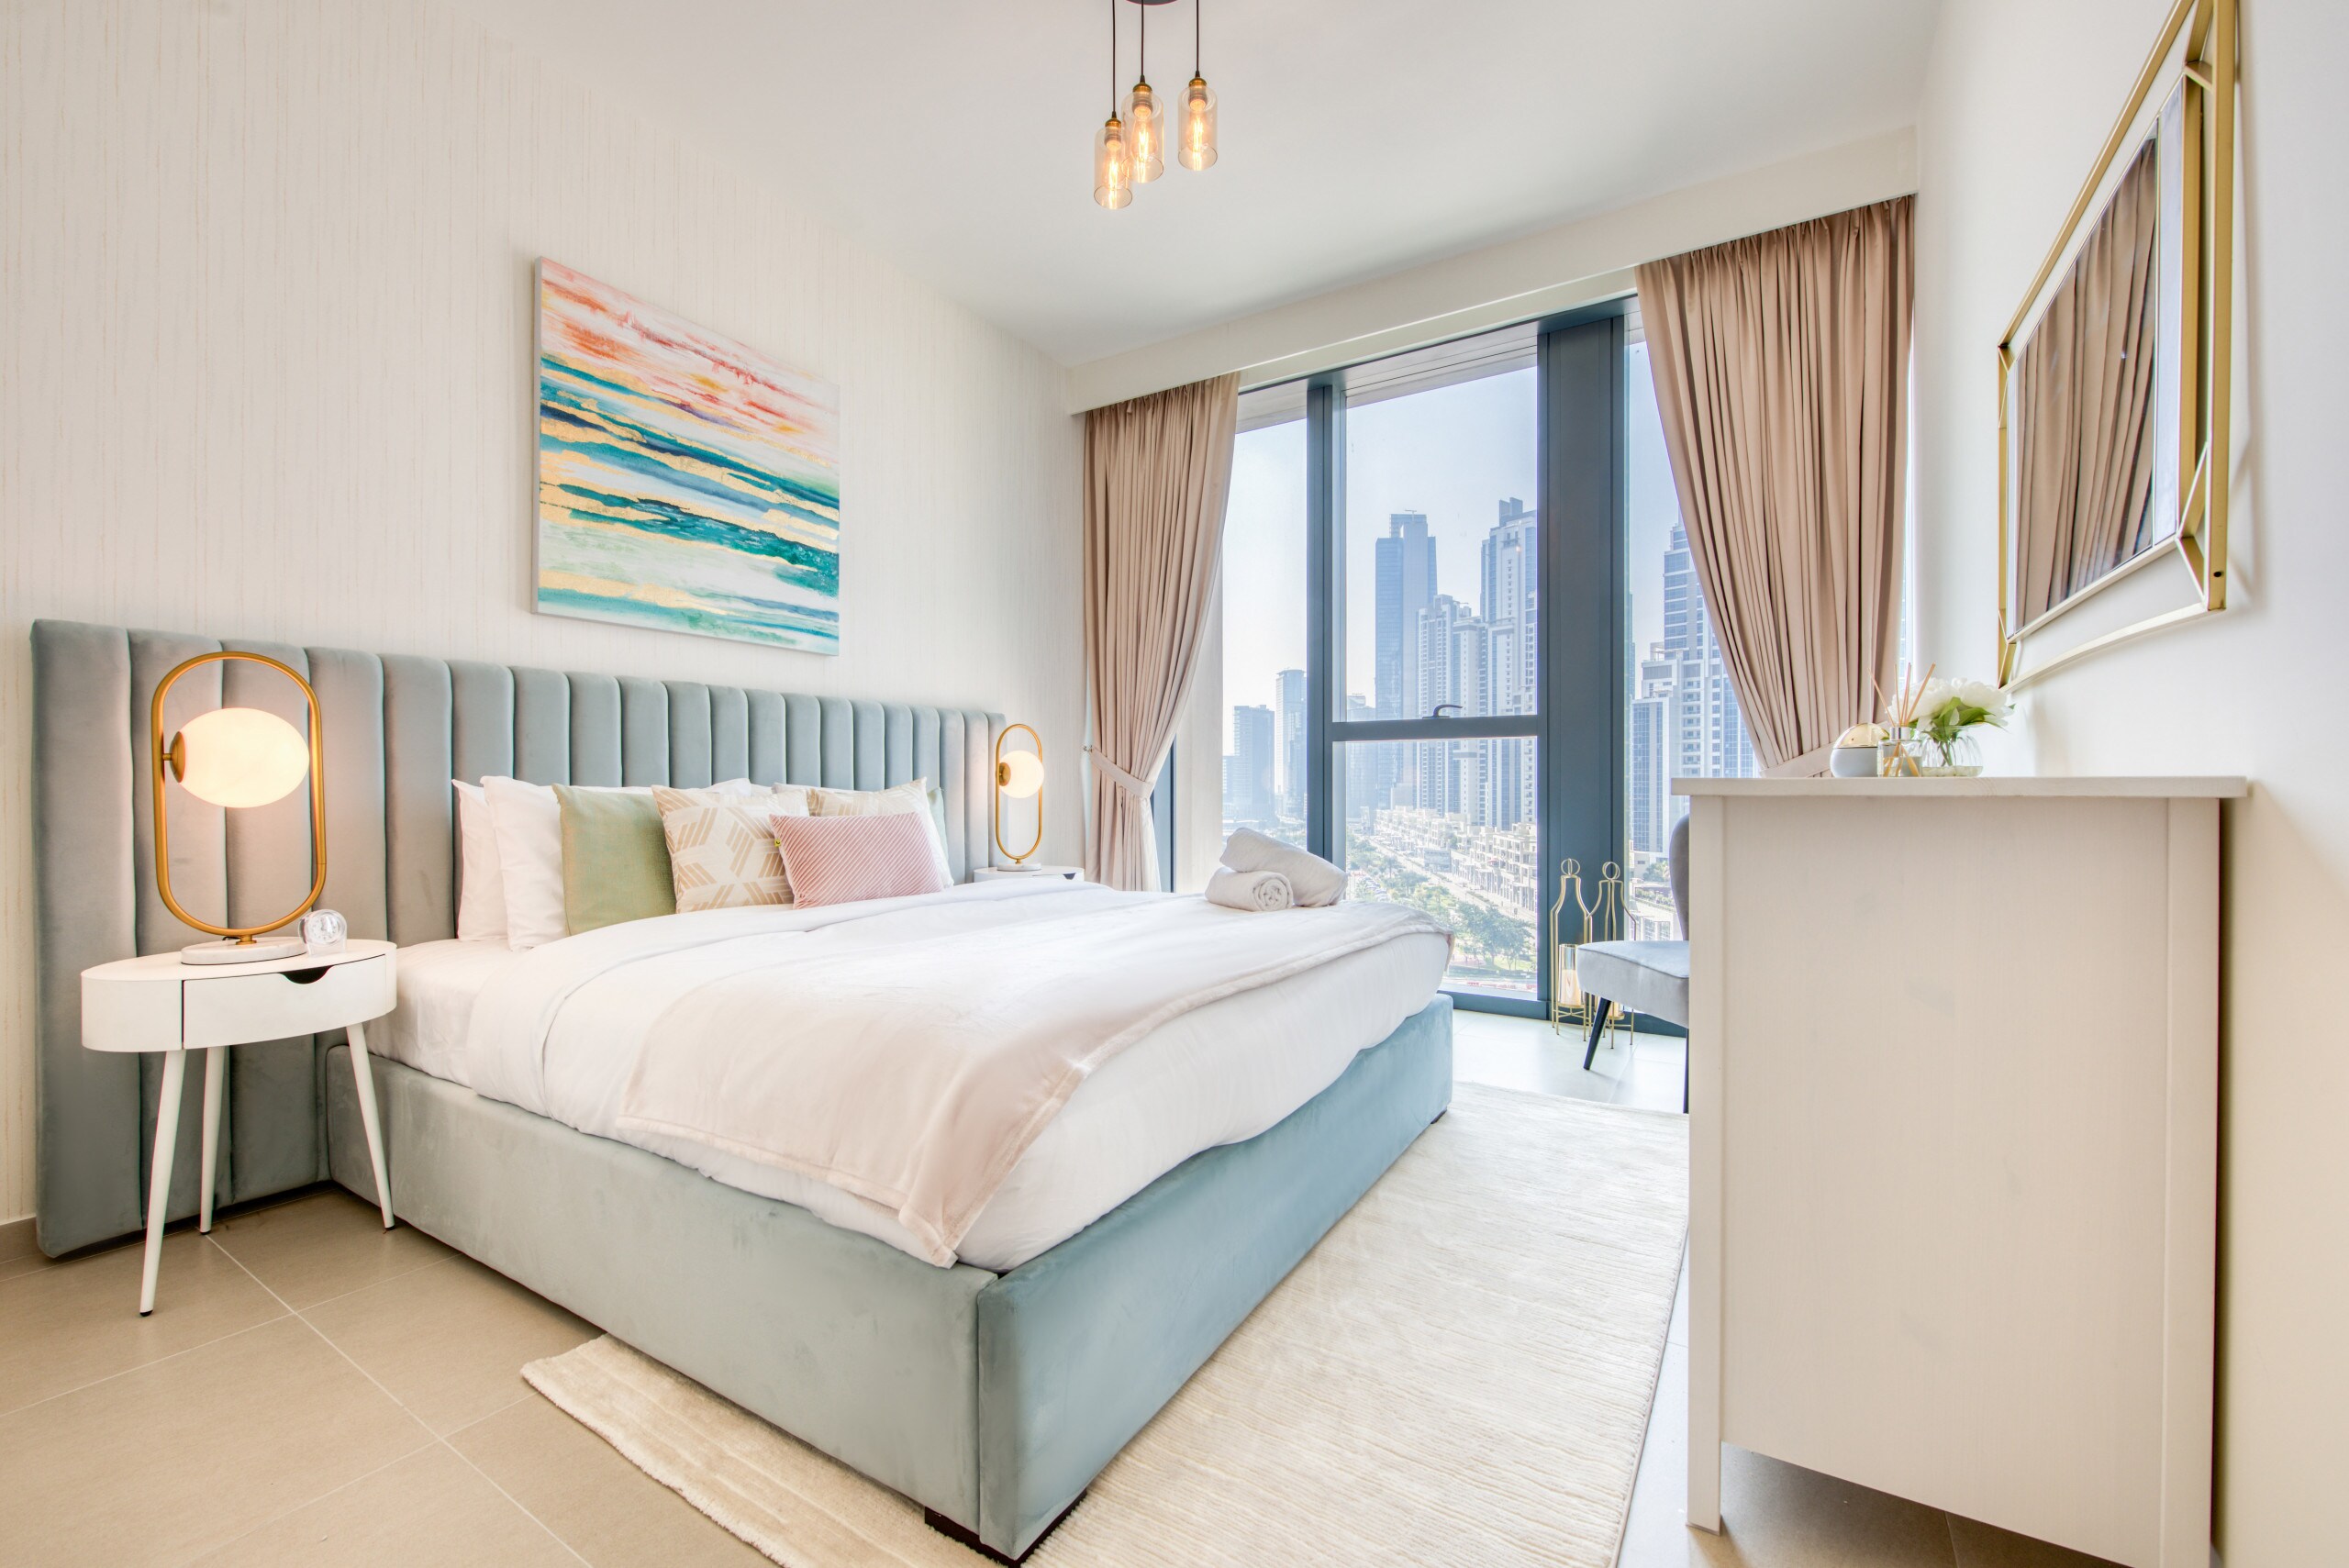 Property Image 2 - Stylish 1BR Apartment at Blvd Heights Downtown Dubai